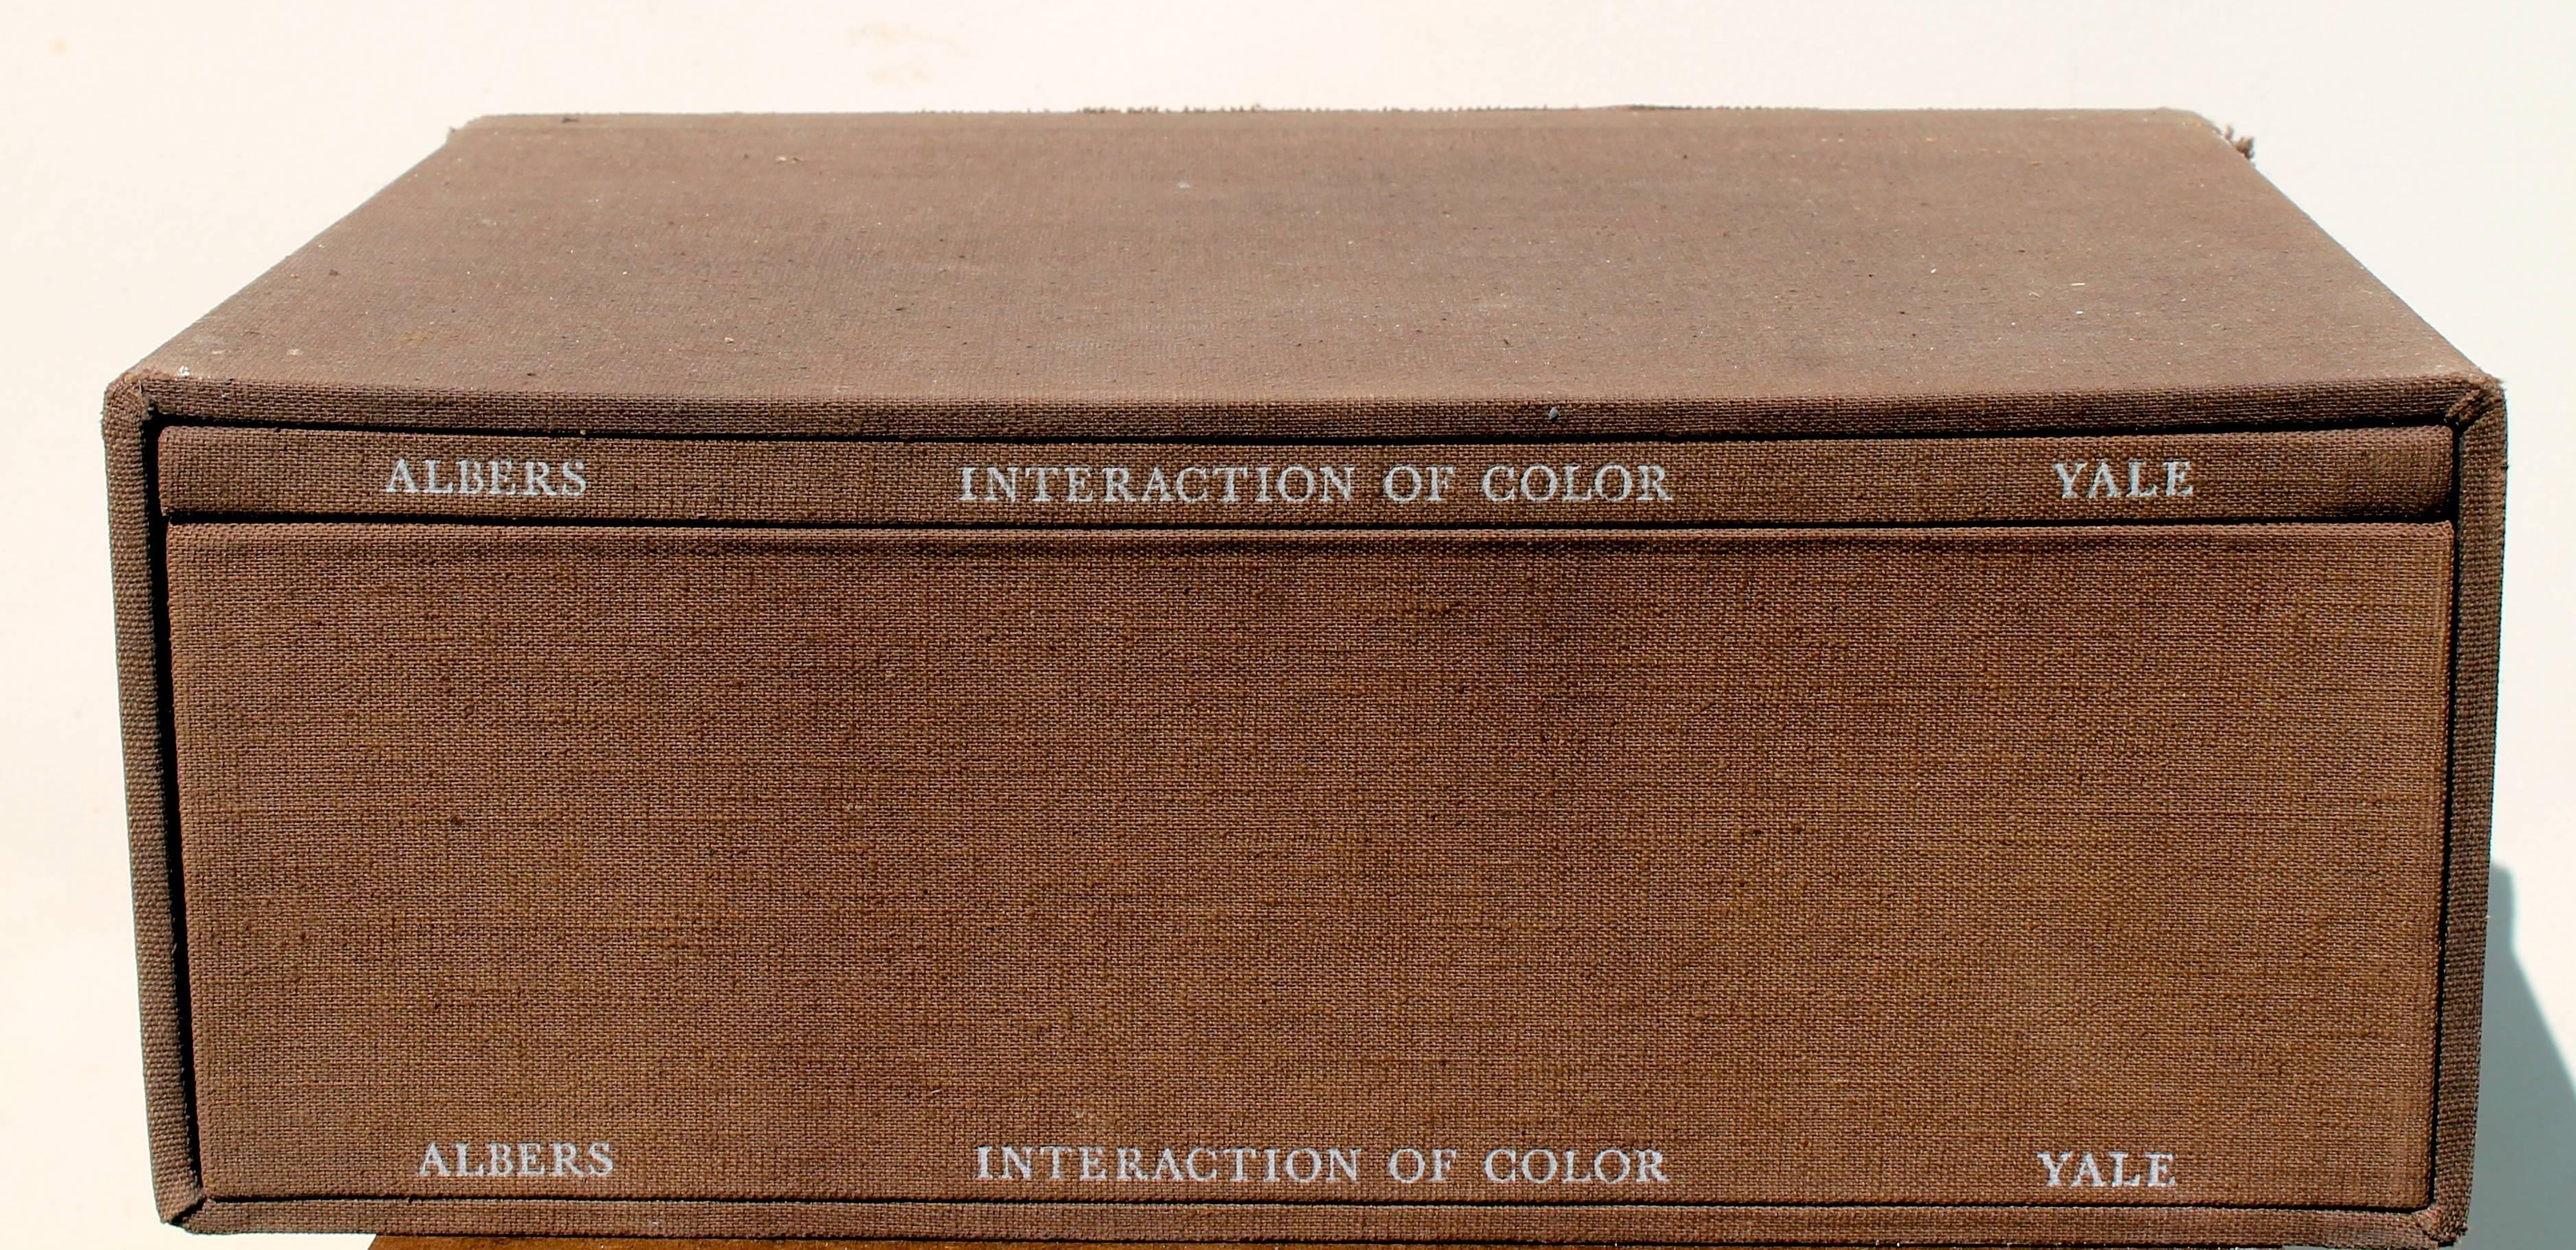 The seminal two volume work demonstrating Albers' complete teachings and ideas of color. Volume! is text and volume 2, 80 screen prints. Many of these prints have flaps. Cut-out overlays and other variables.